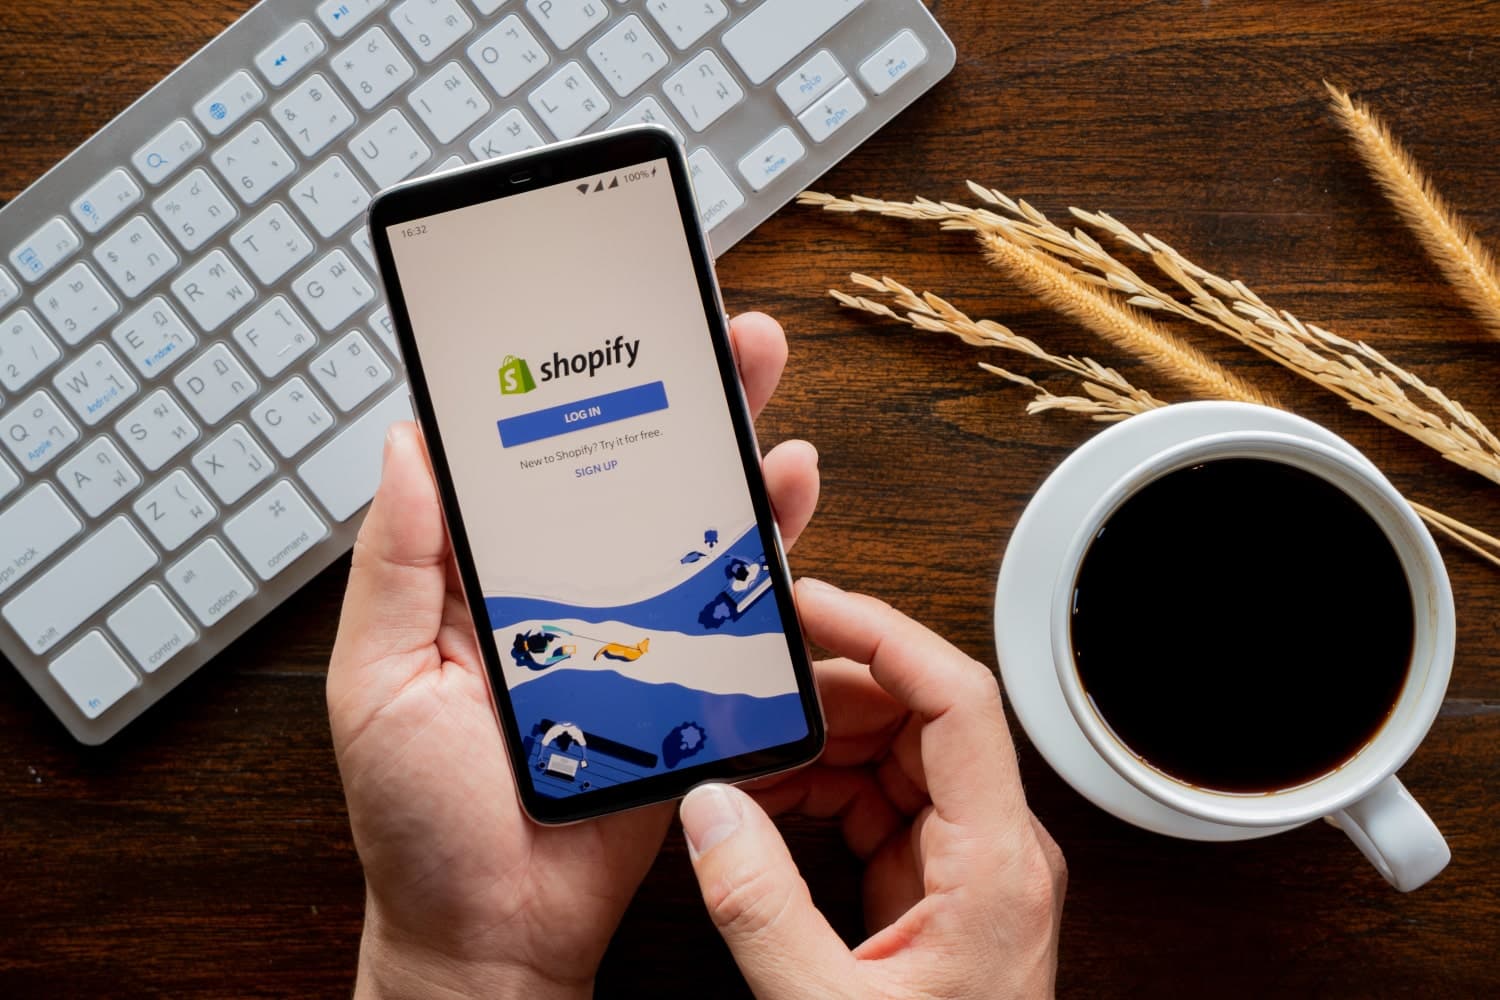 A man holding a cellphone which displays the Shopify login page on the screen